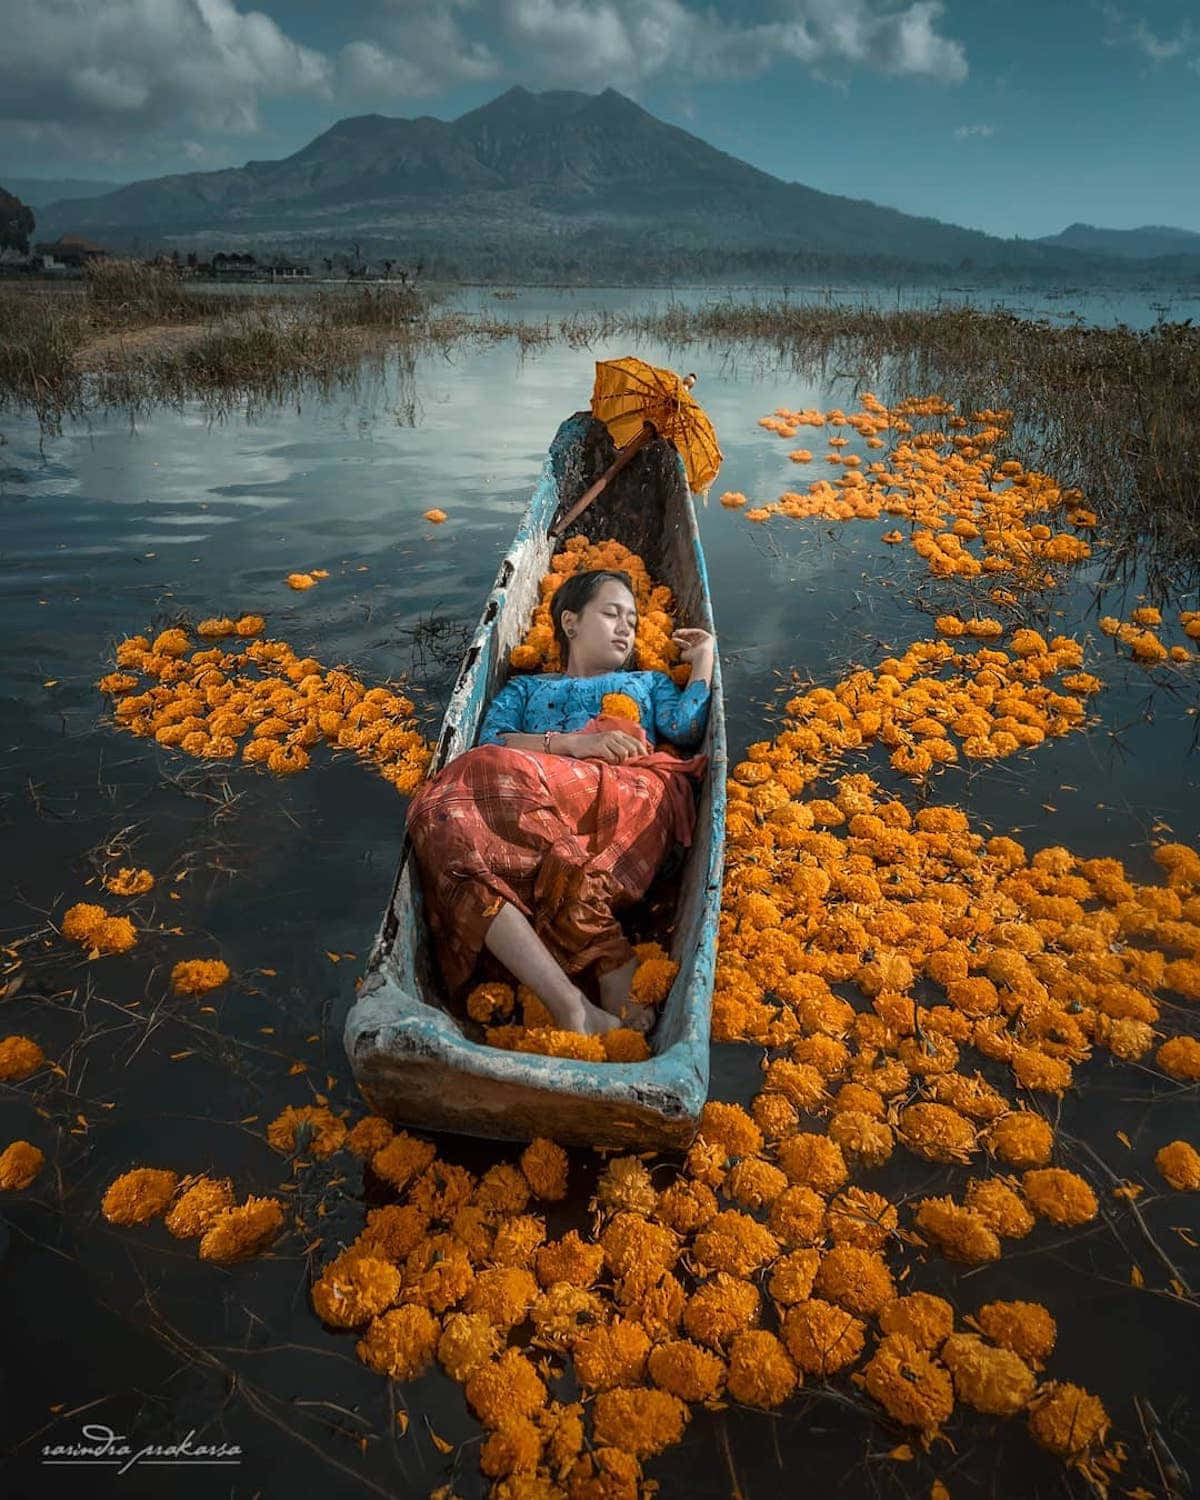 A Woman Is Laying In A Boat With Orange Flowers On It